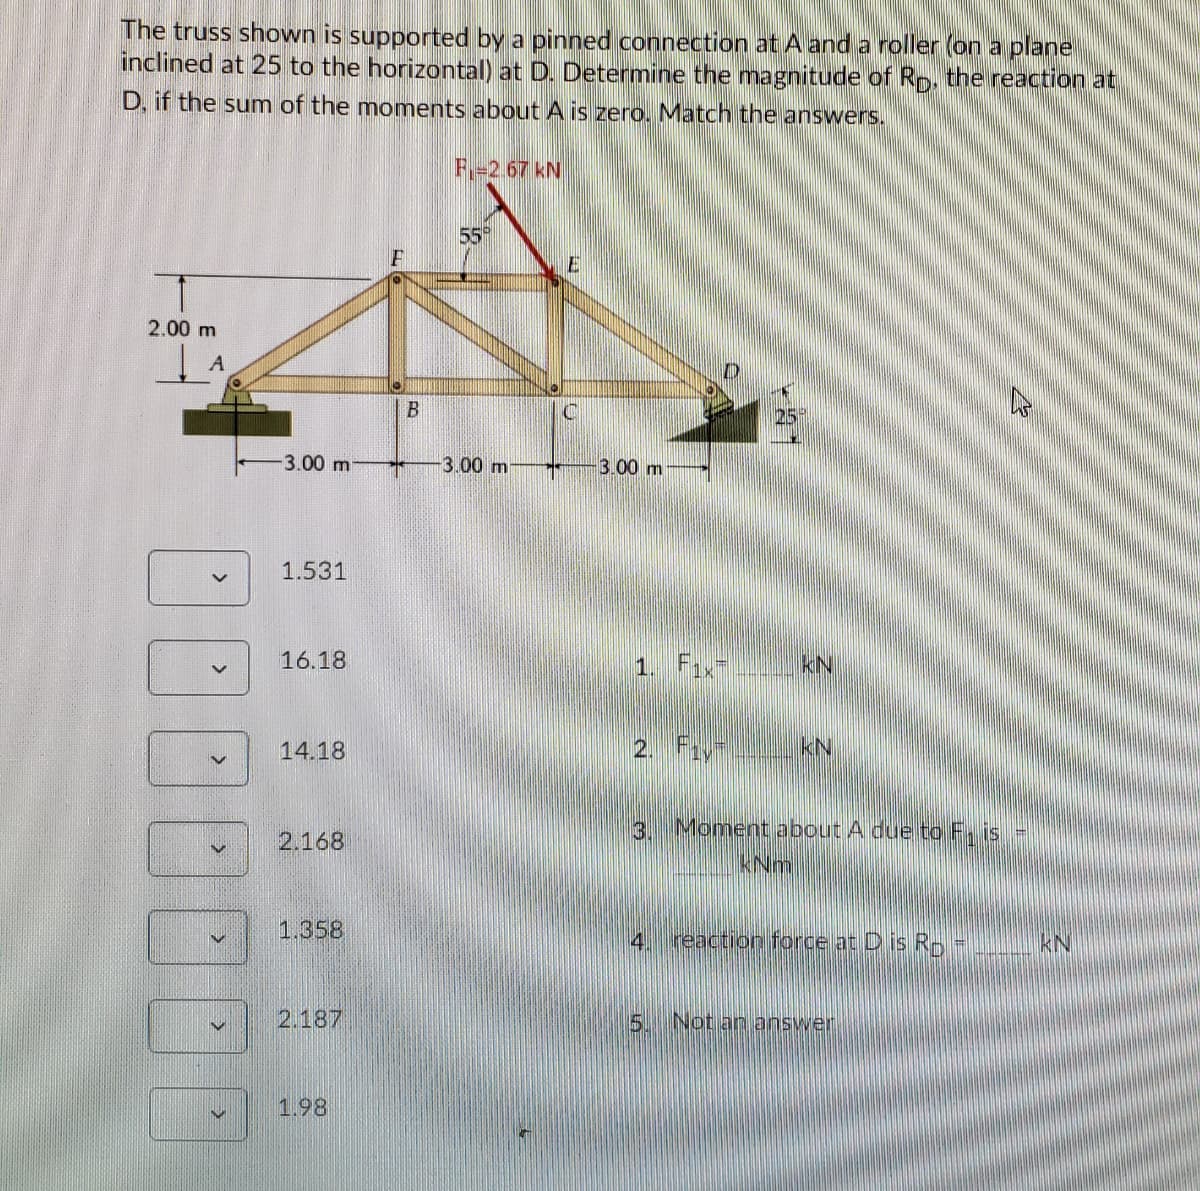 The truss shown is supported by a pinned connection at A and a roller (on a plane
inclined at 25 to the horizontal) at D. Determine the magnitude of Rp, the reaction at
D, if the sum of the moments about A is zero. Match the answers.
F-2.67 kN
55
2.00 m
3.00 m
3.00 m
3.00 m
1.531
16.18
1. Fax kN
14.18
2. Fiy
kN
3. Moment about A due to F, is =
2.168
KNm
1,358
reaction force at D is Rp
4
KN
2.187
5 Not an answer
1.98
